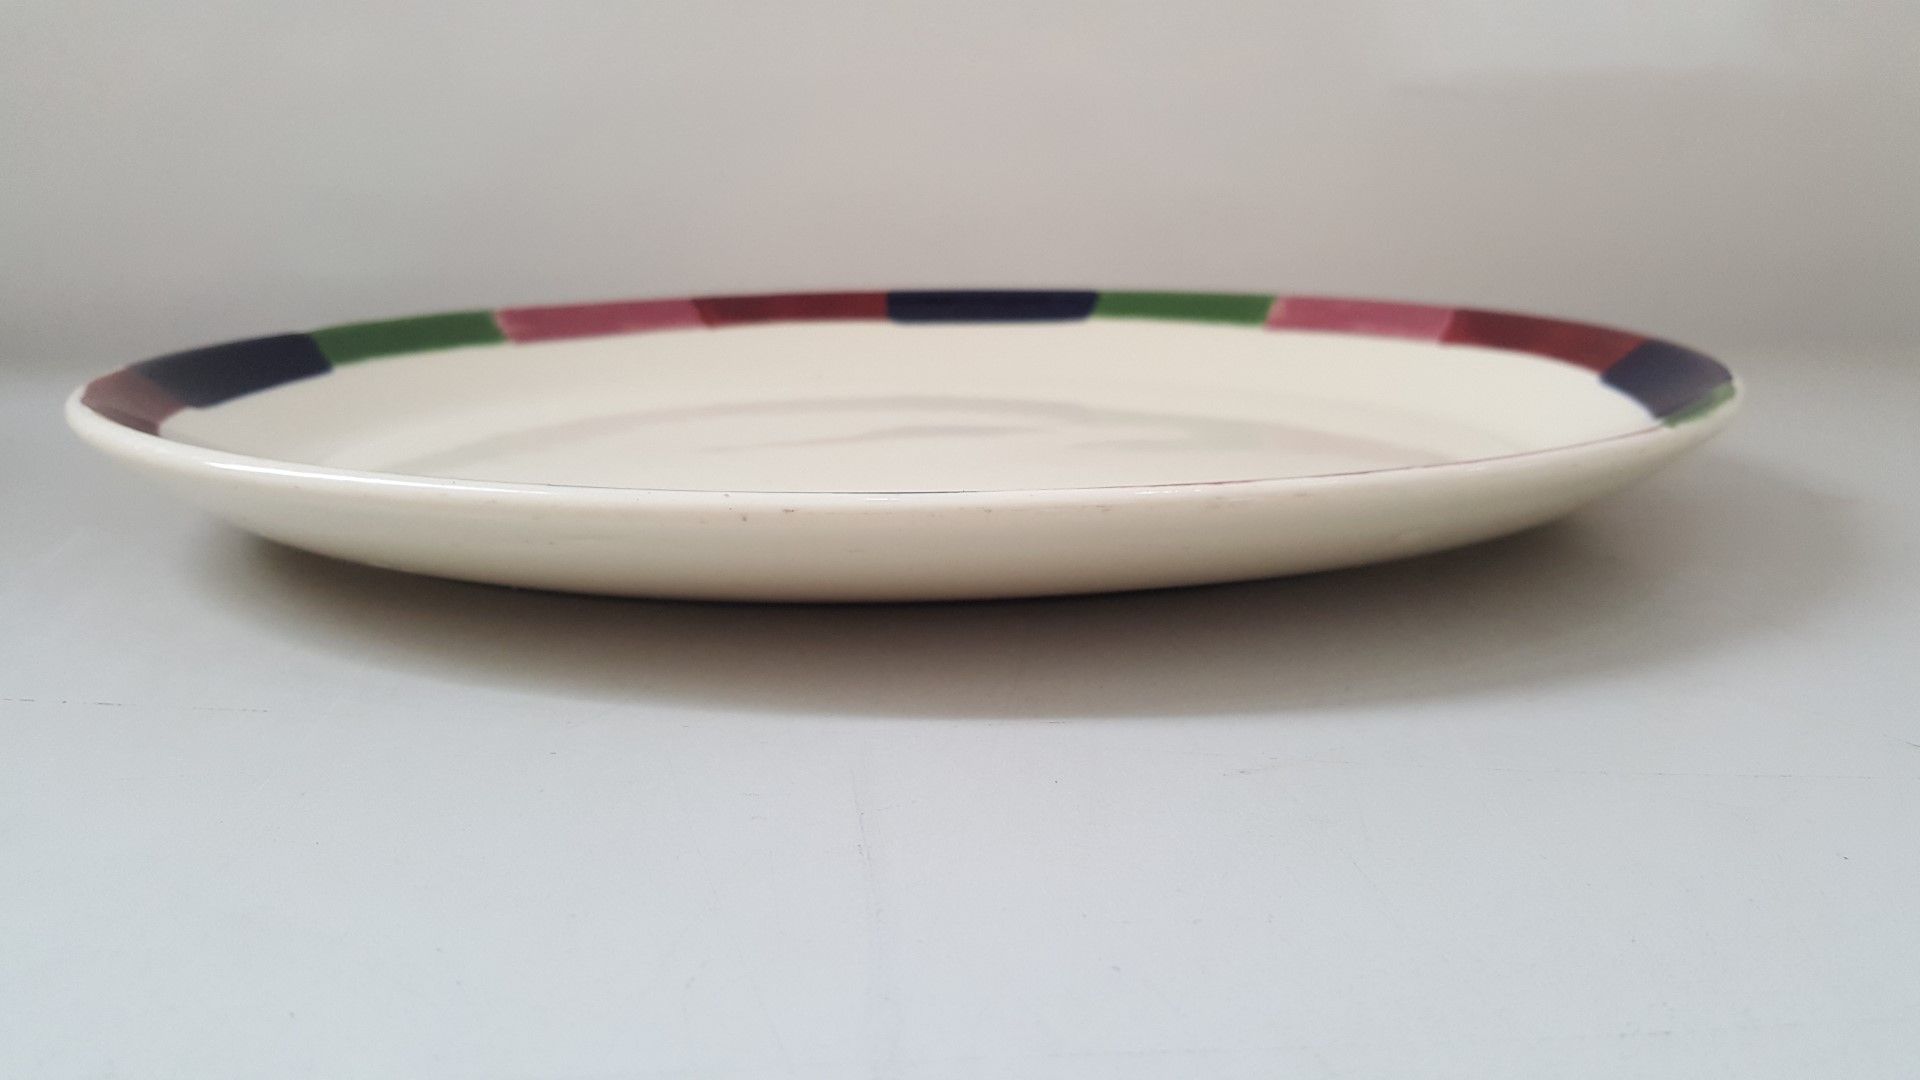 14 x Steelite Oval Serving Plates Cream With Pattered Egde L30/W23.5CM - Ref CQ270 - Image 3 of 4